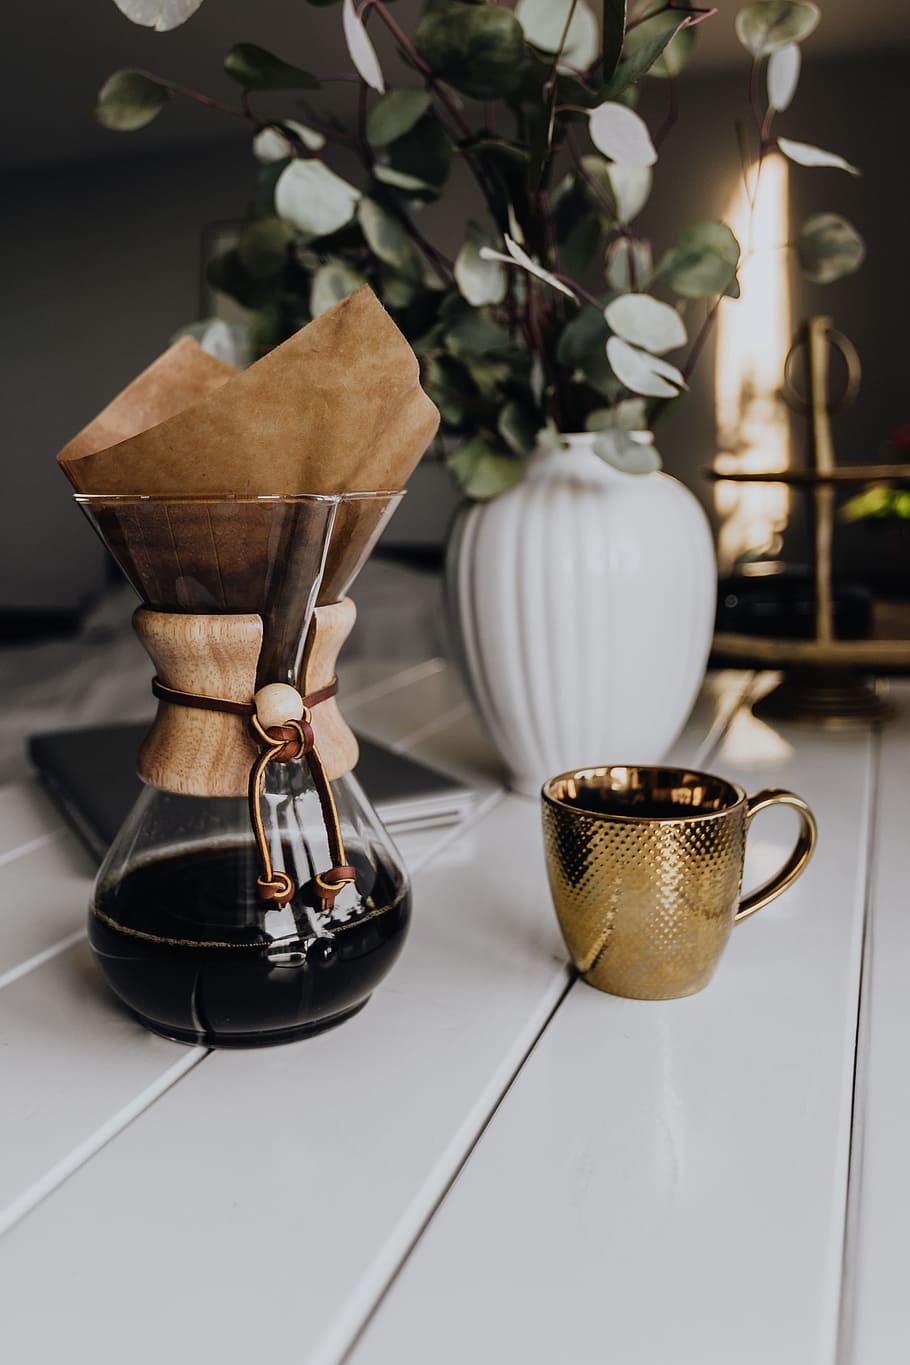 chemex coffee maker, gold cup, coffee, cup, morning, break, cafe, mug, pause, plant